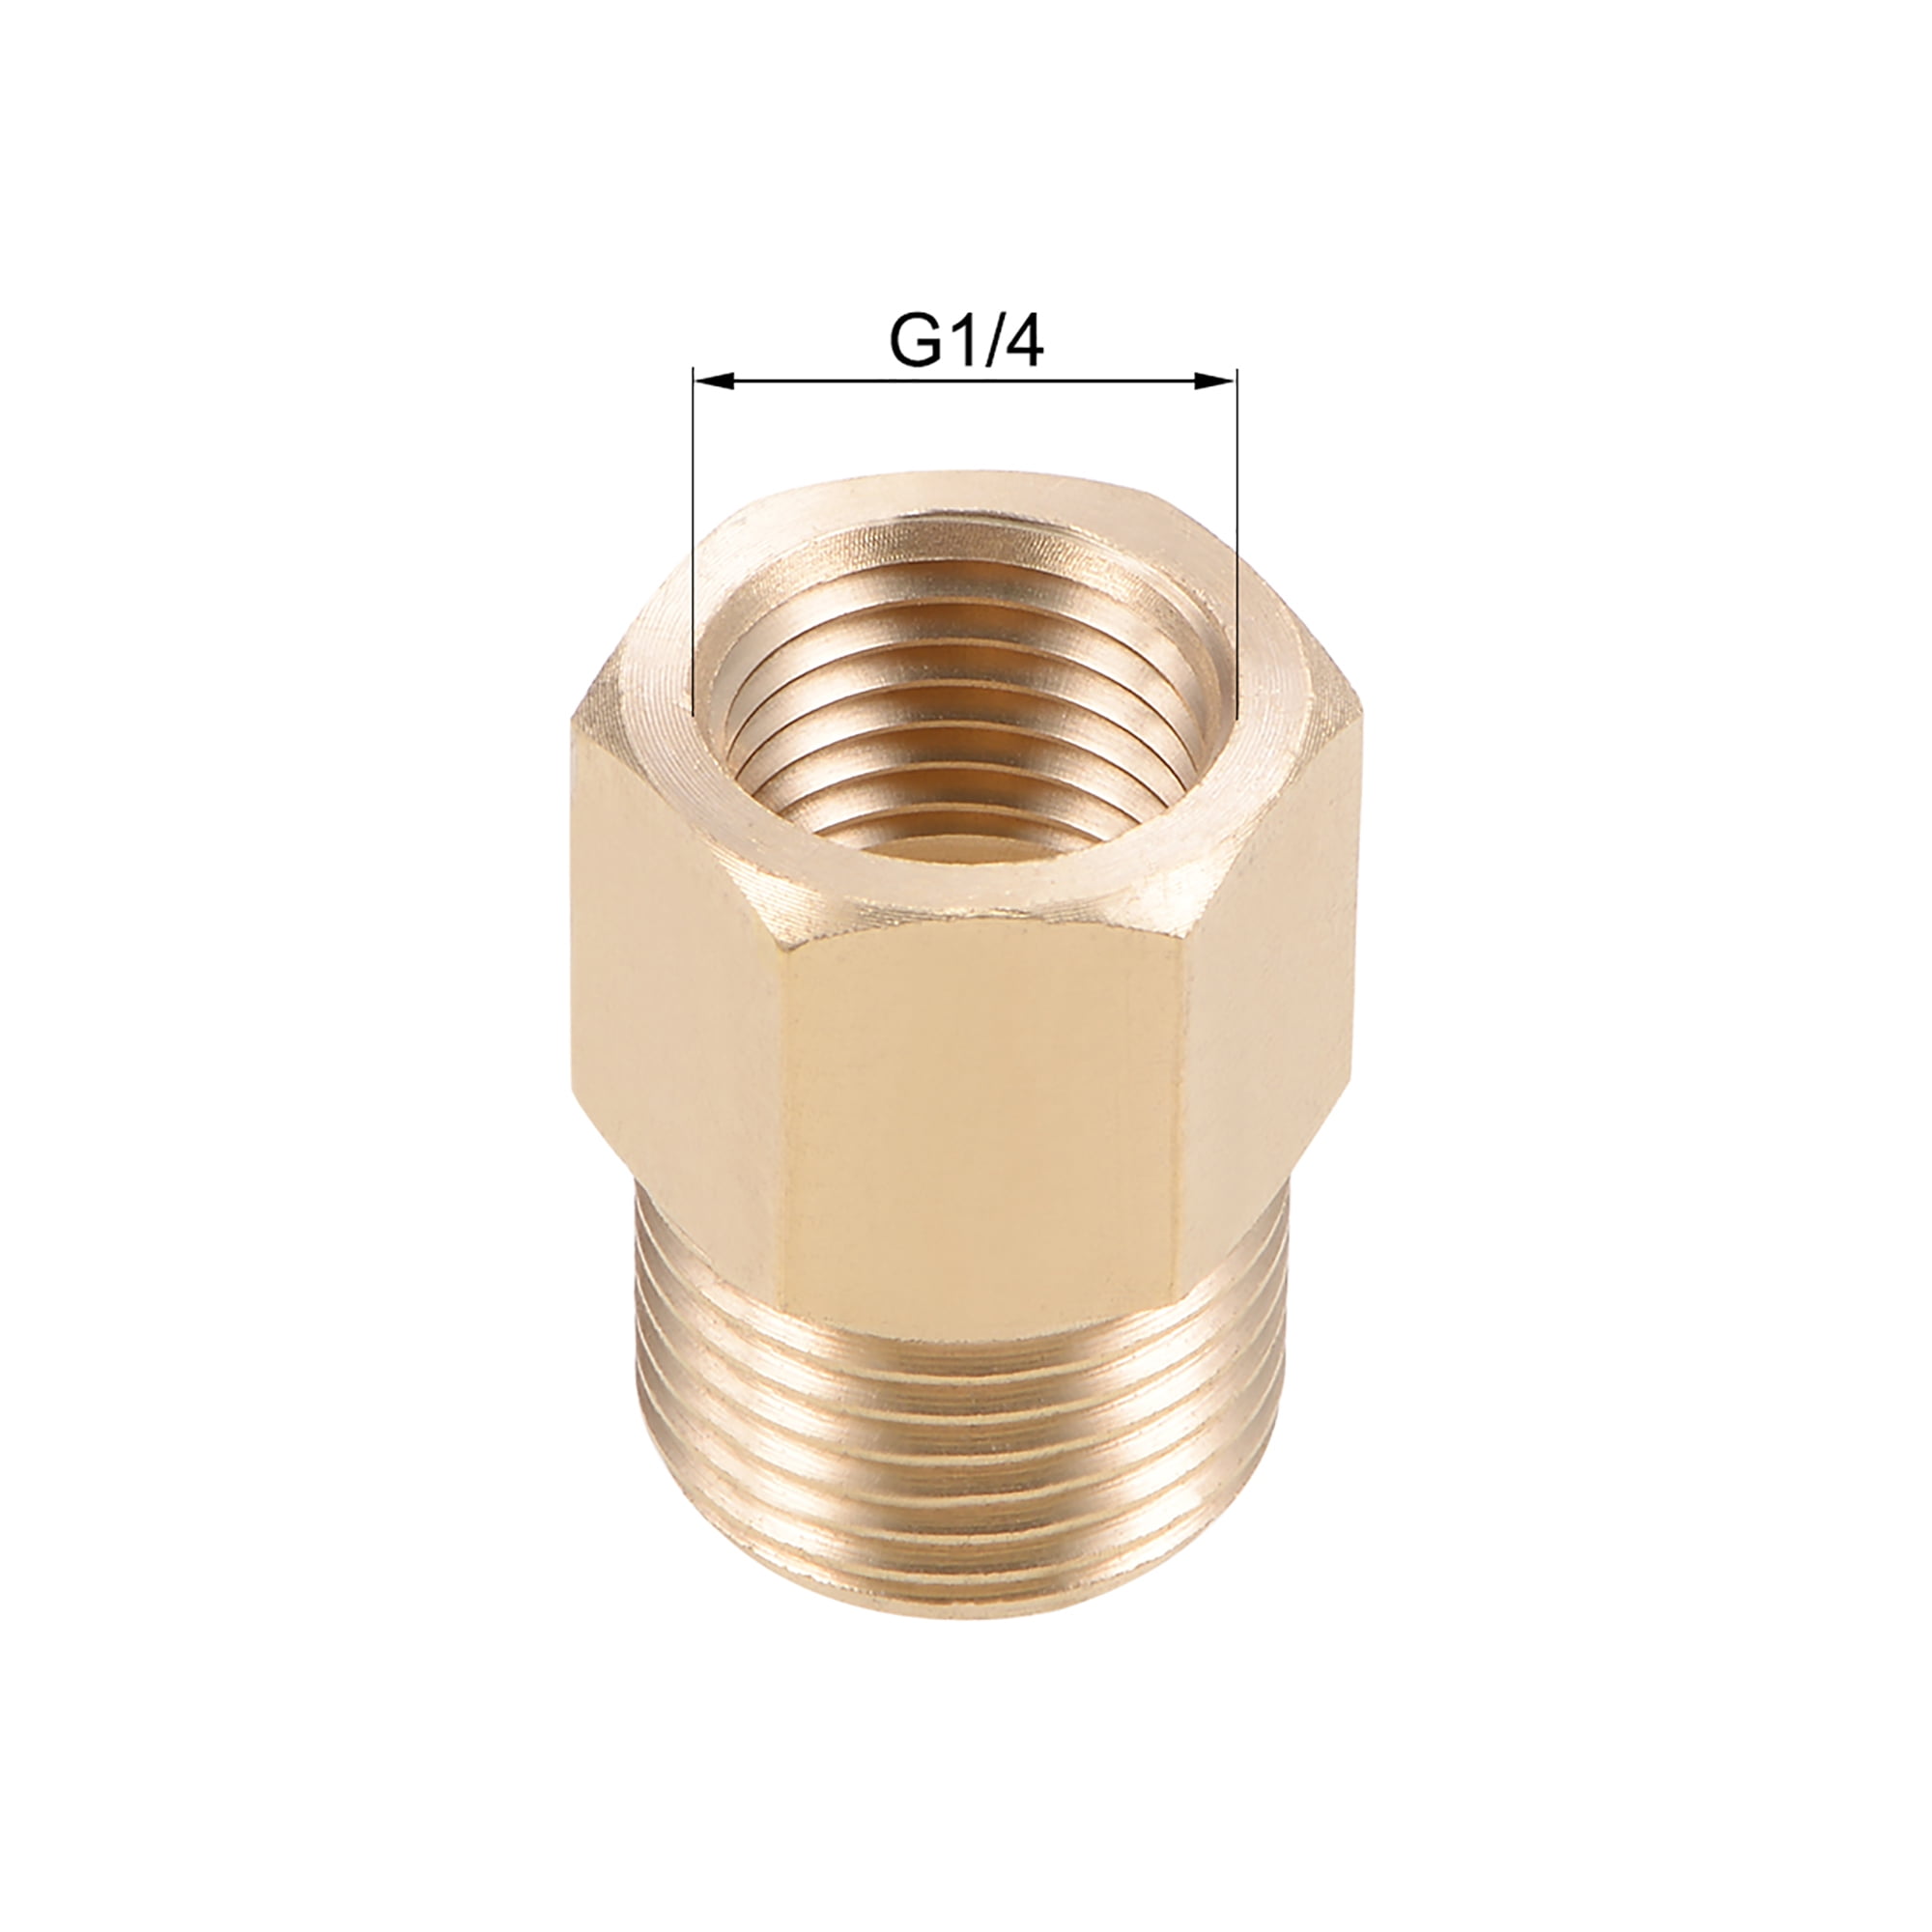 Brass Threaded Pipe Fitting G3/8 Male x G1/4 Female Hex Bushing Adapter 5pcs 